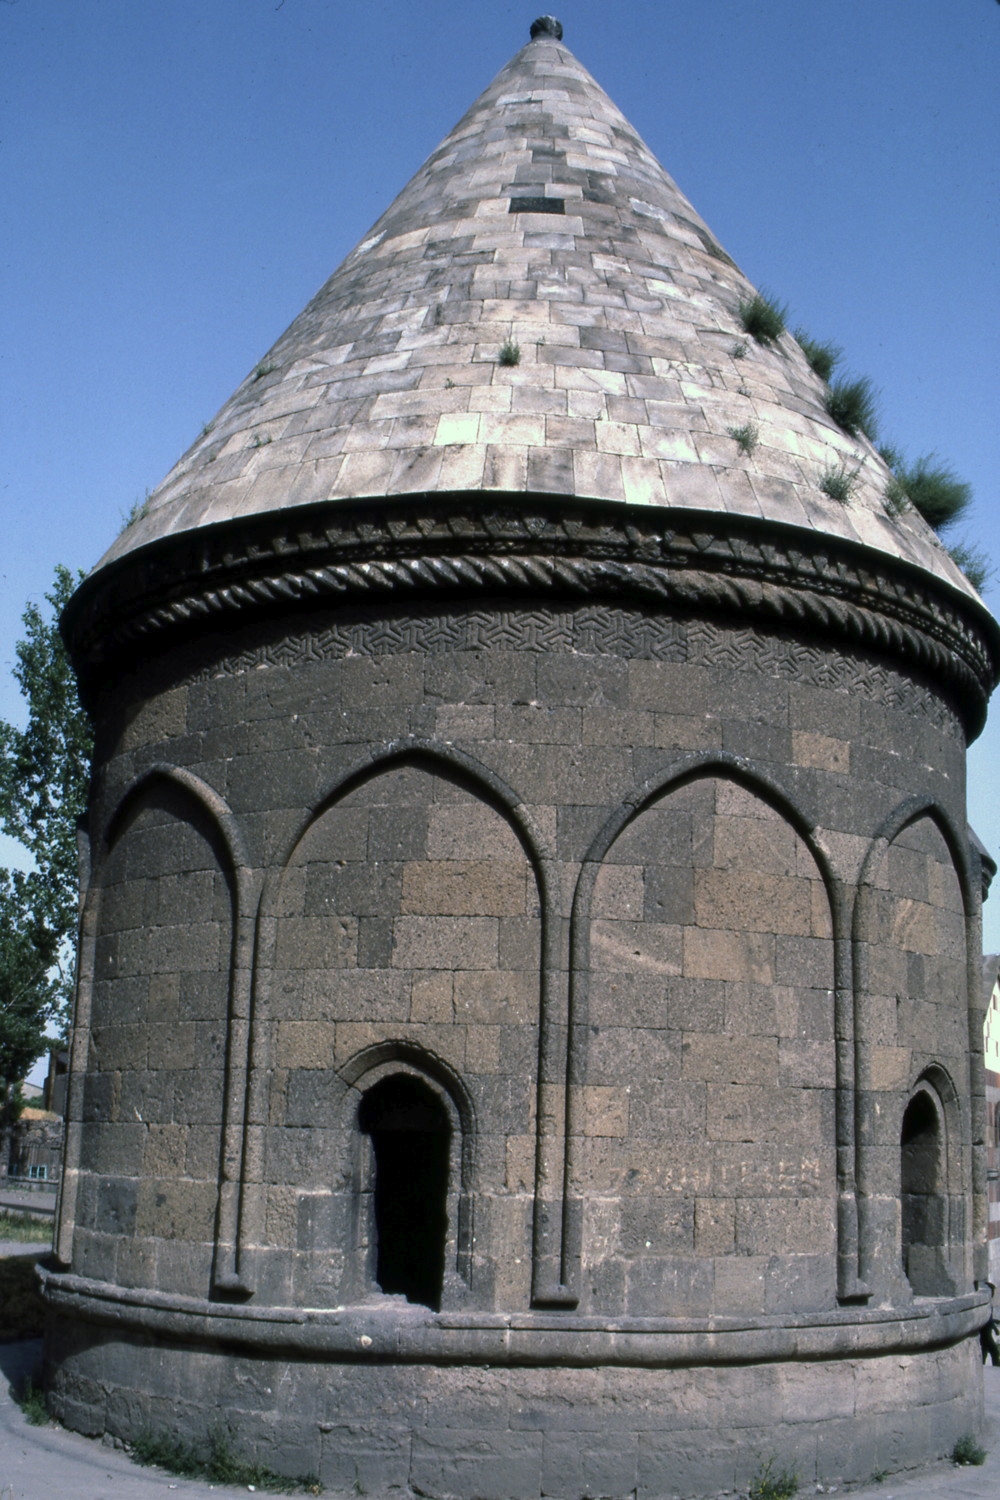 General view of one of the unidentified tombs